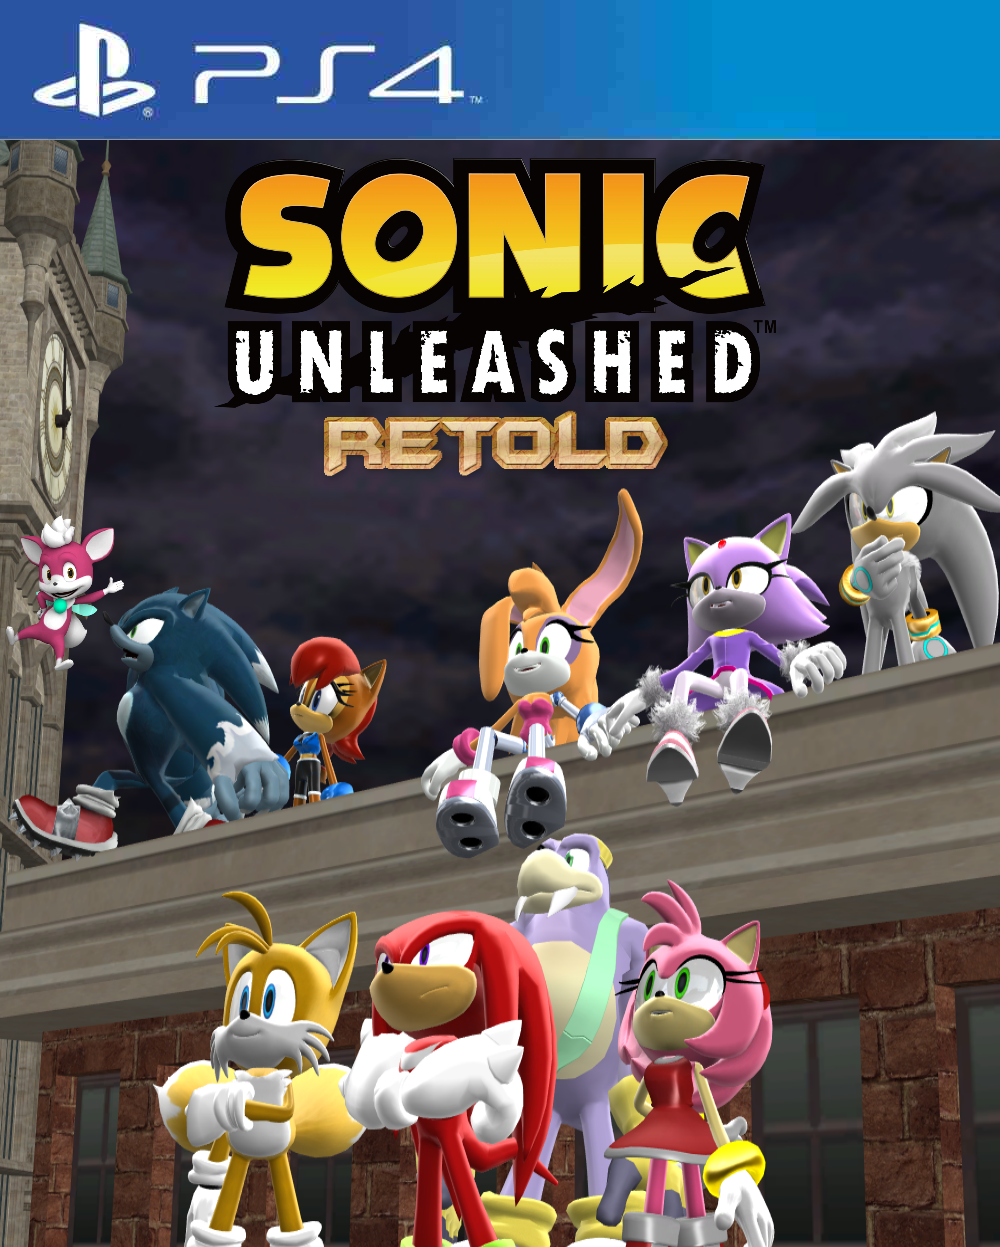 SONIC UNLEASHED RETOLD PS4 Cover by JamesFan1991 on DeviantArt